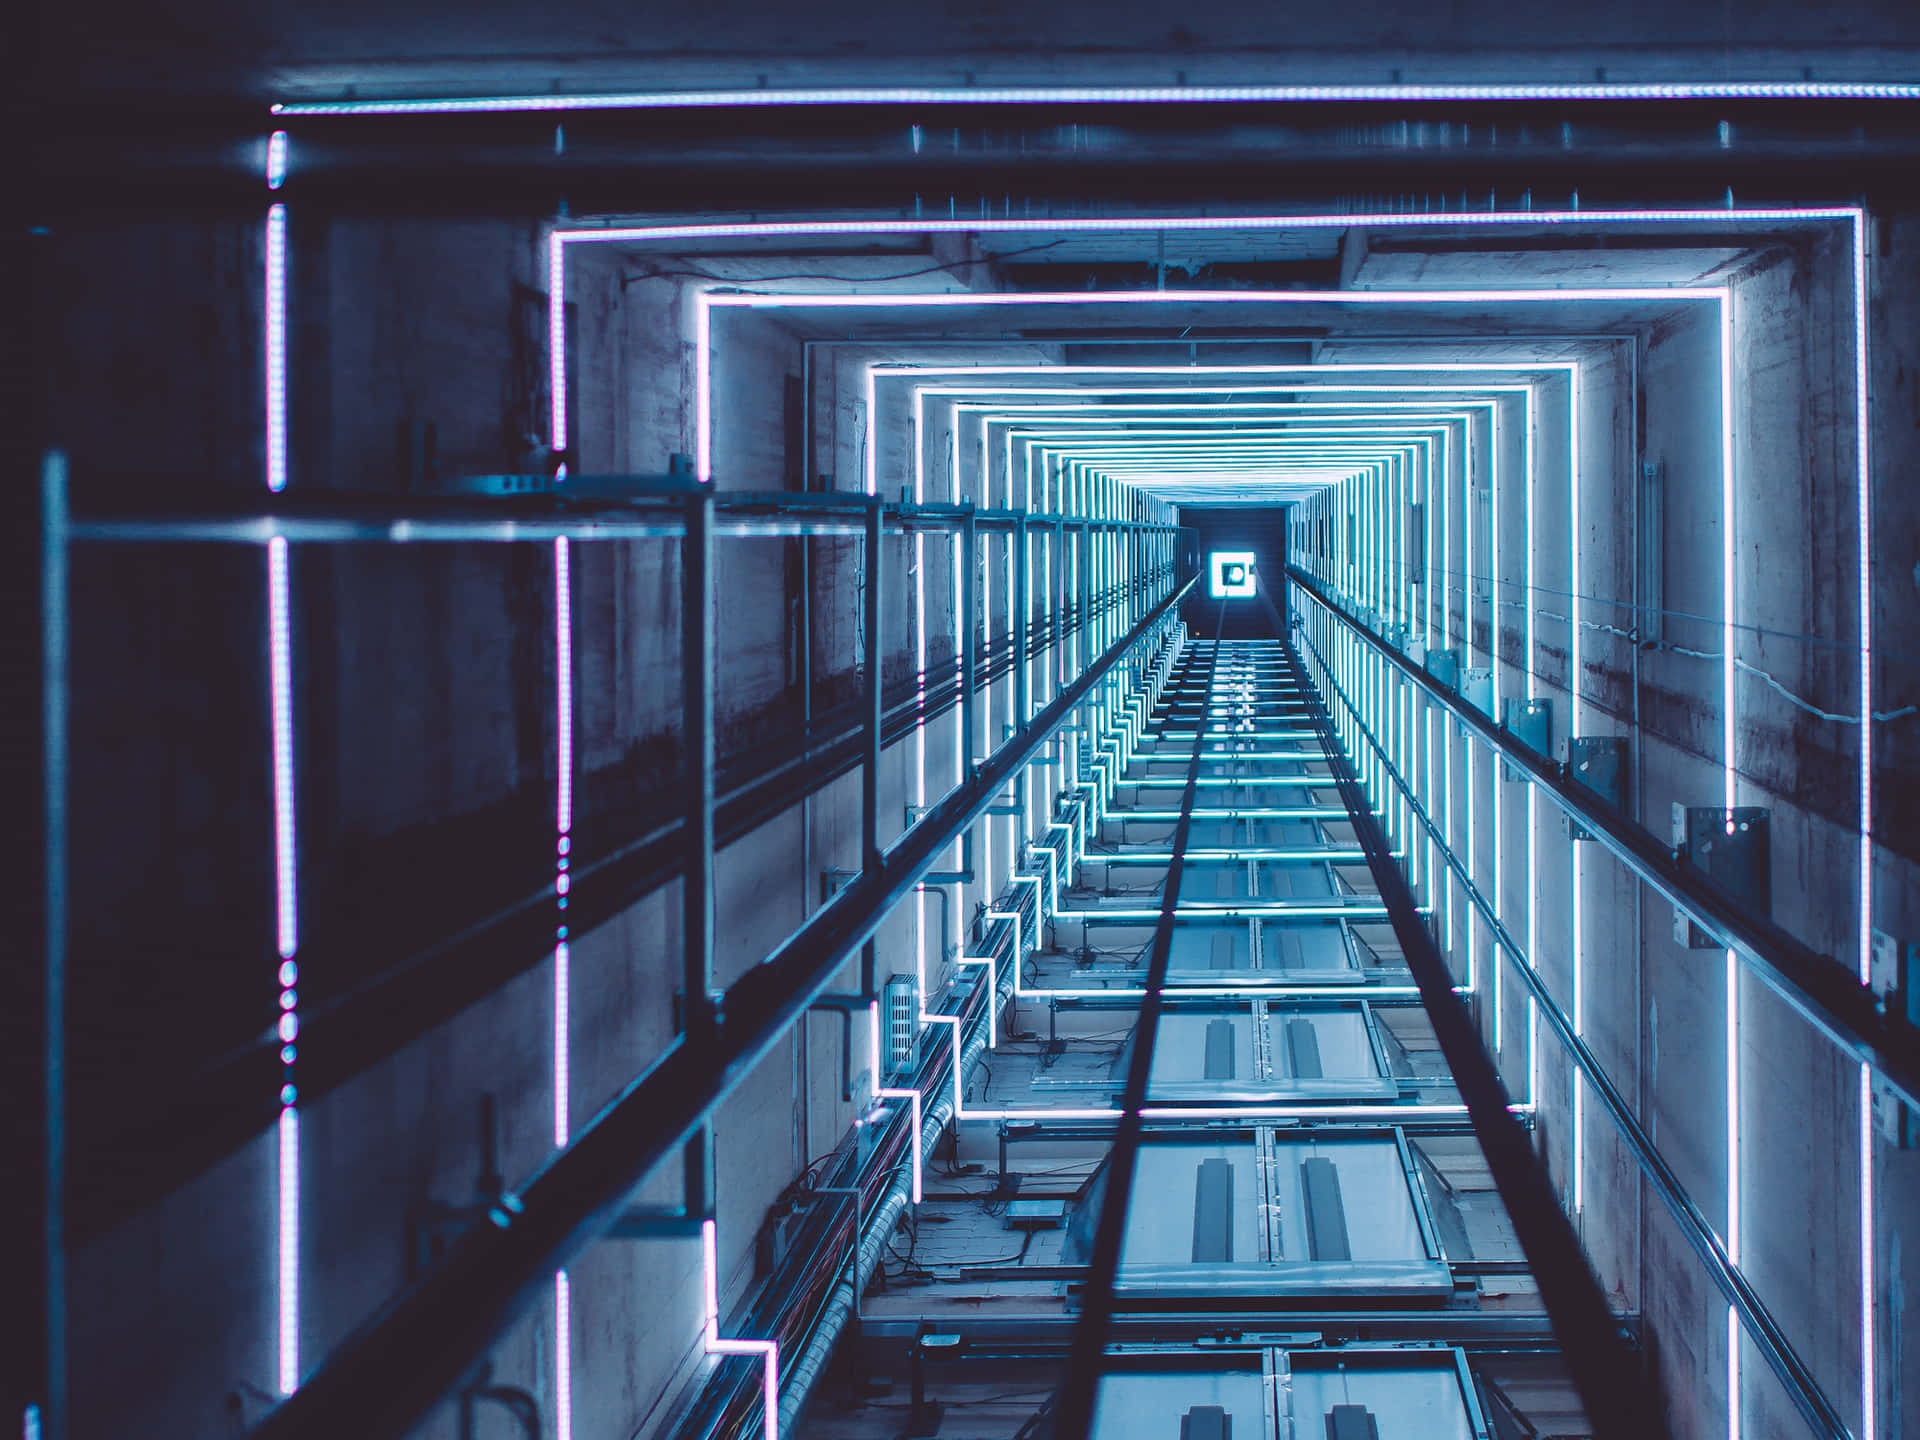 Step into the future with this high-tech elevator